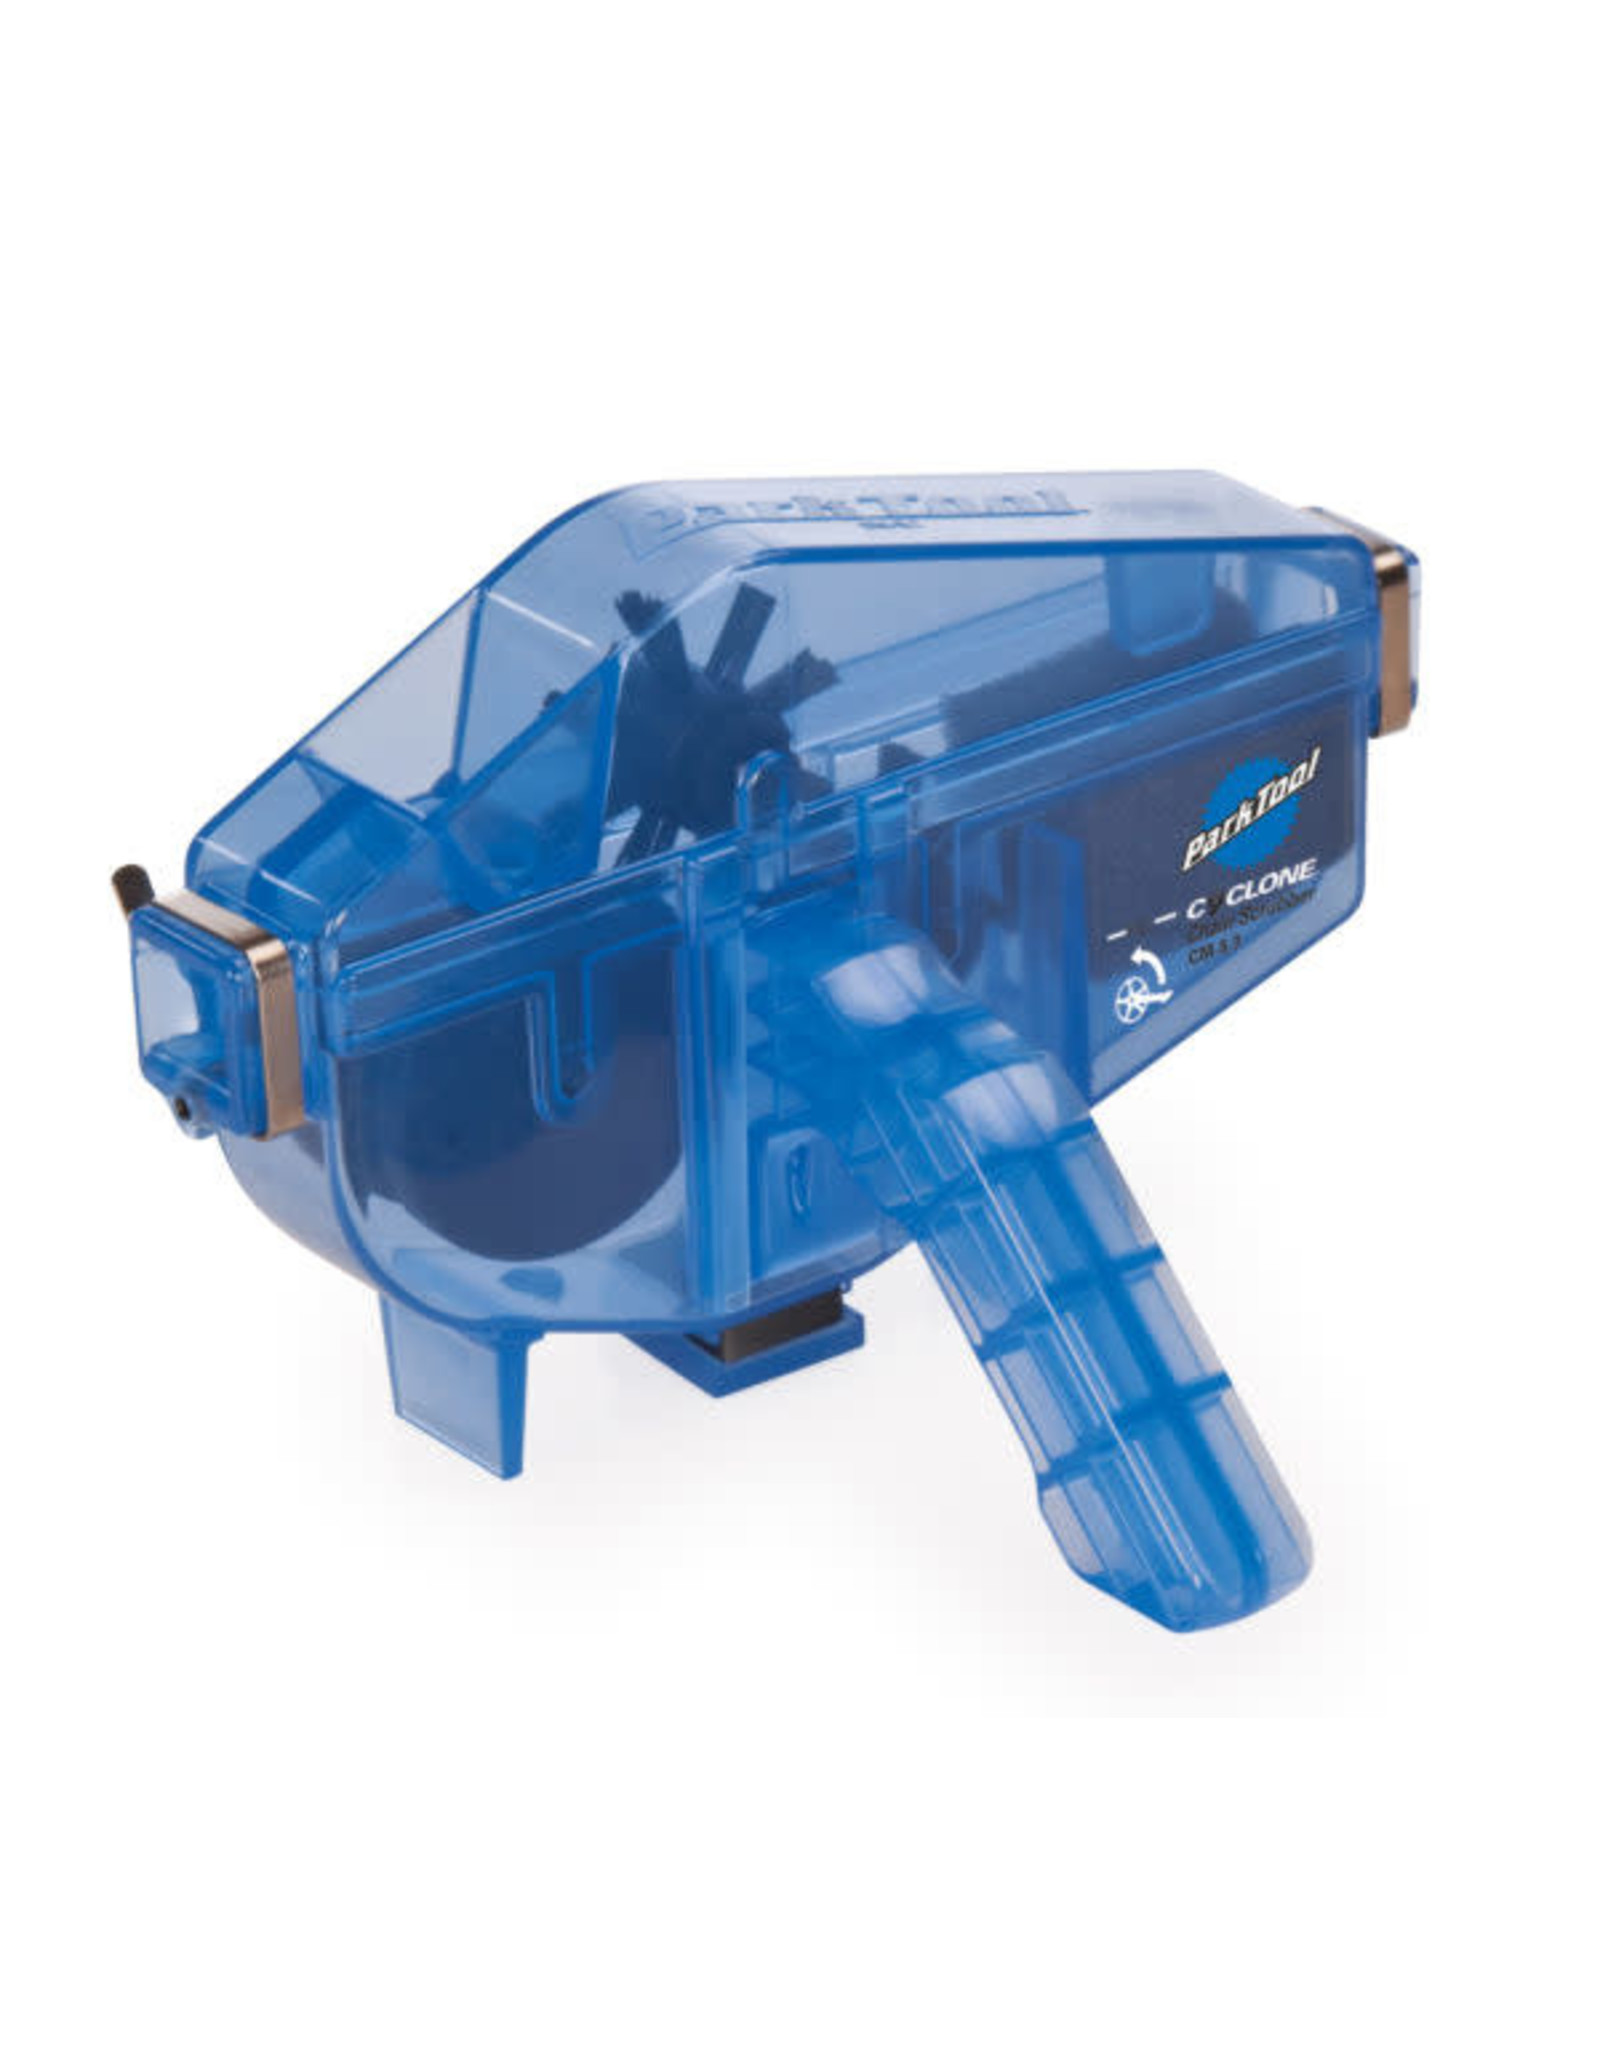 Park Tool Park CM-5.3 chain cleaner (cleaner only)